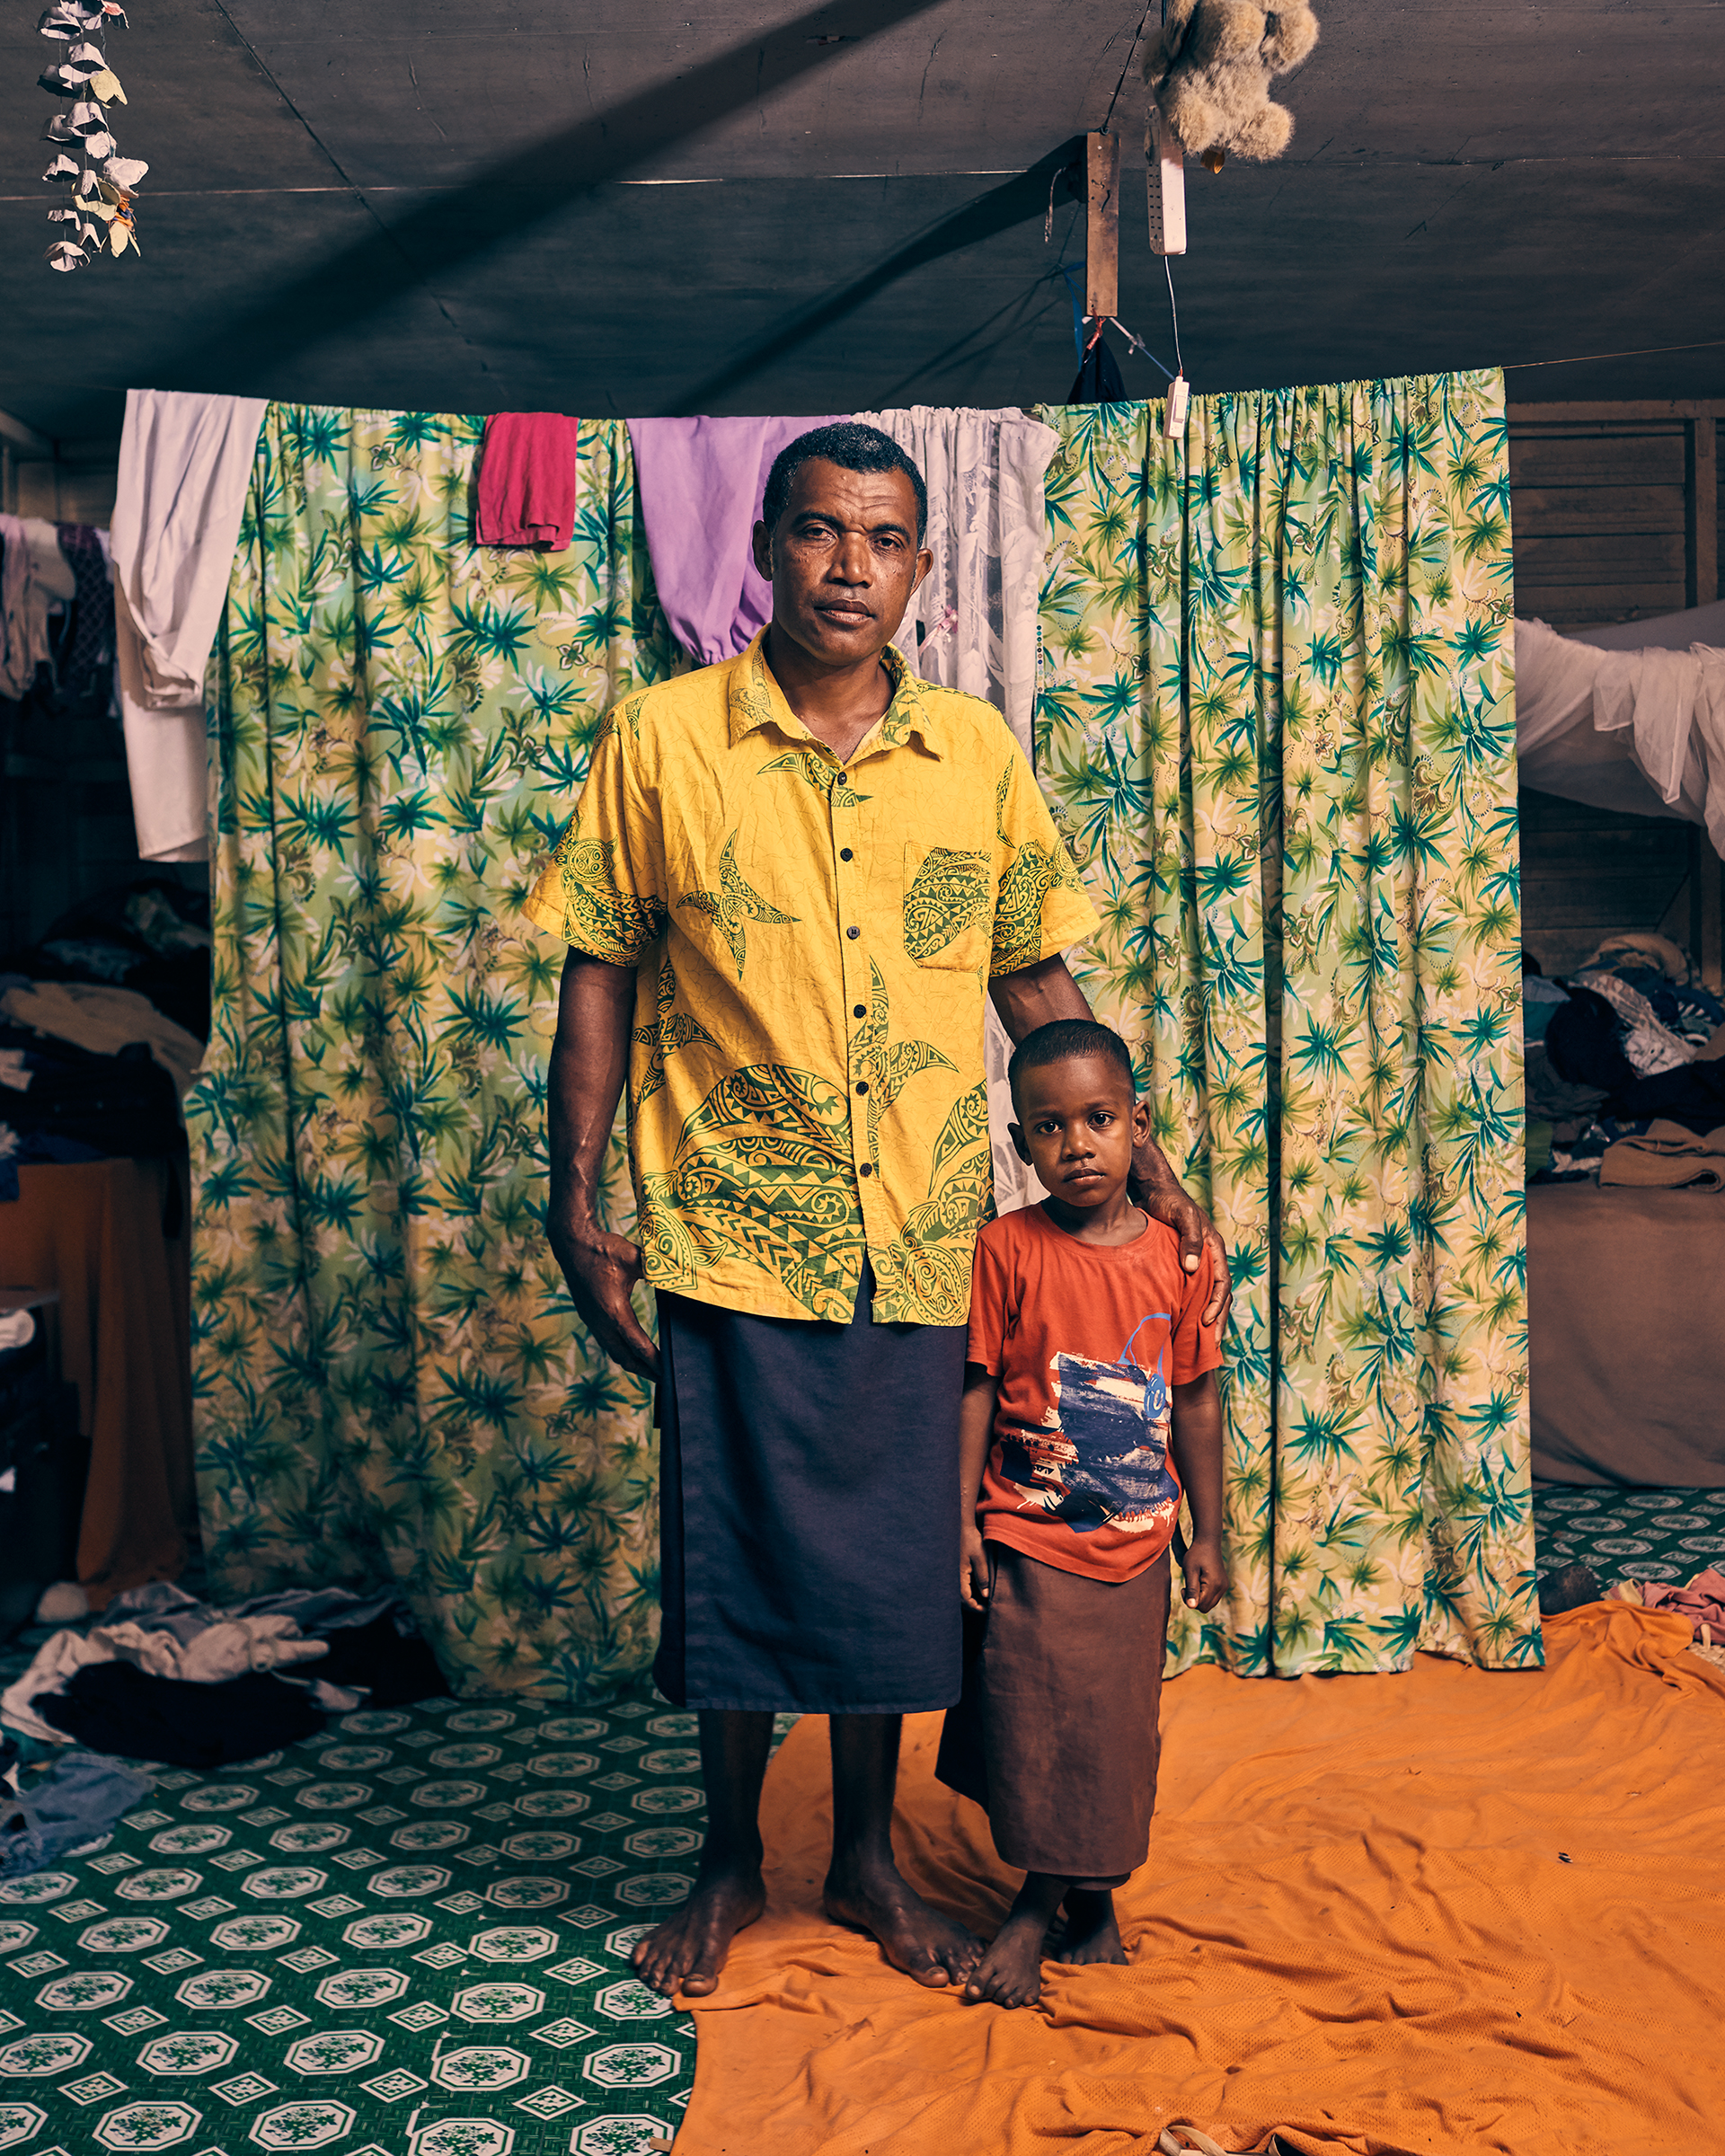 Penioni Soqovata and his son Josefa Mairara, photographed in their home in Vunidogoloa. The boy was the first baby born in the relocated village.